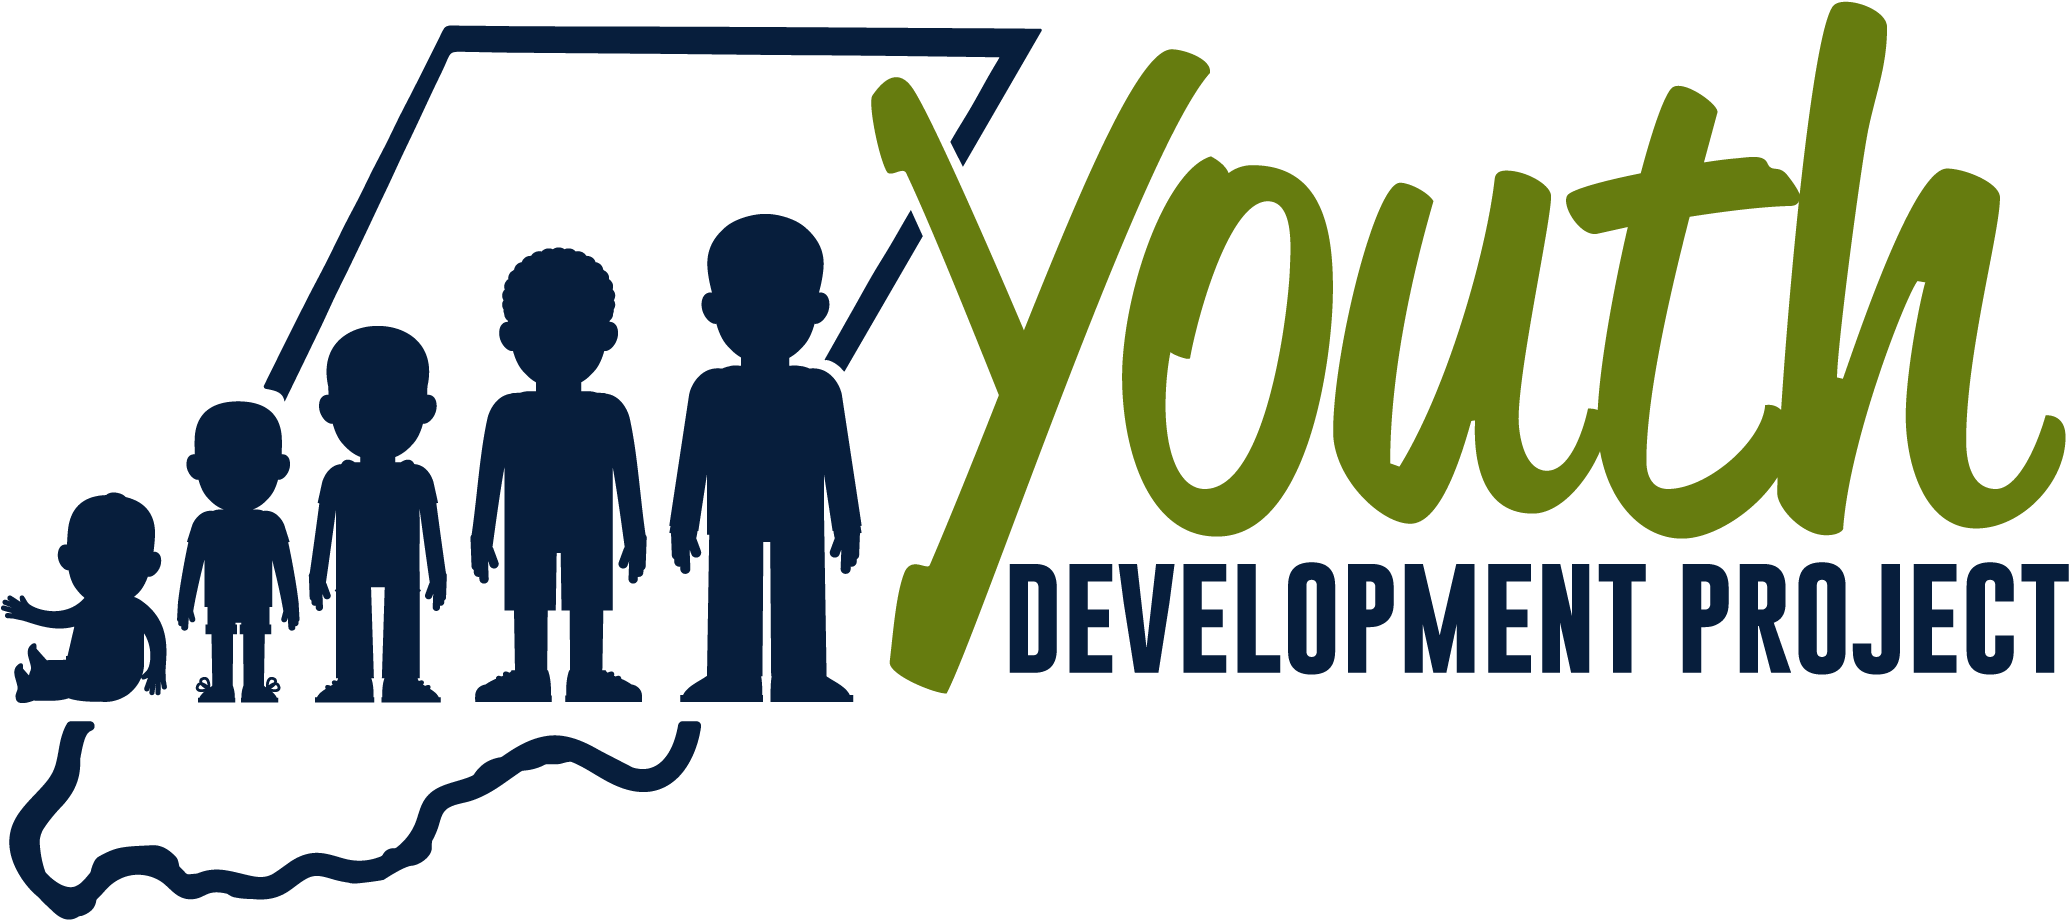 Worldwide Young Adult And Youth Development Project - Dekalb County, Georgia (2203x1014)